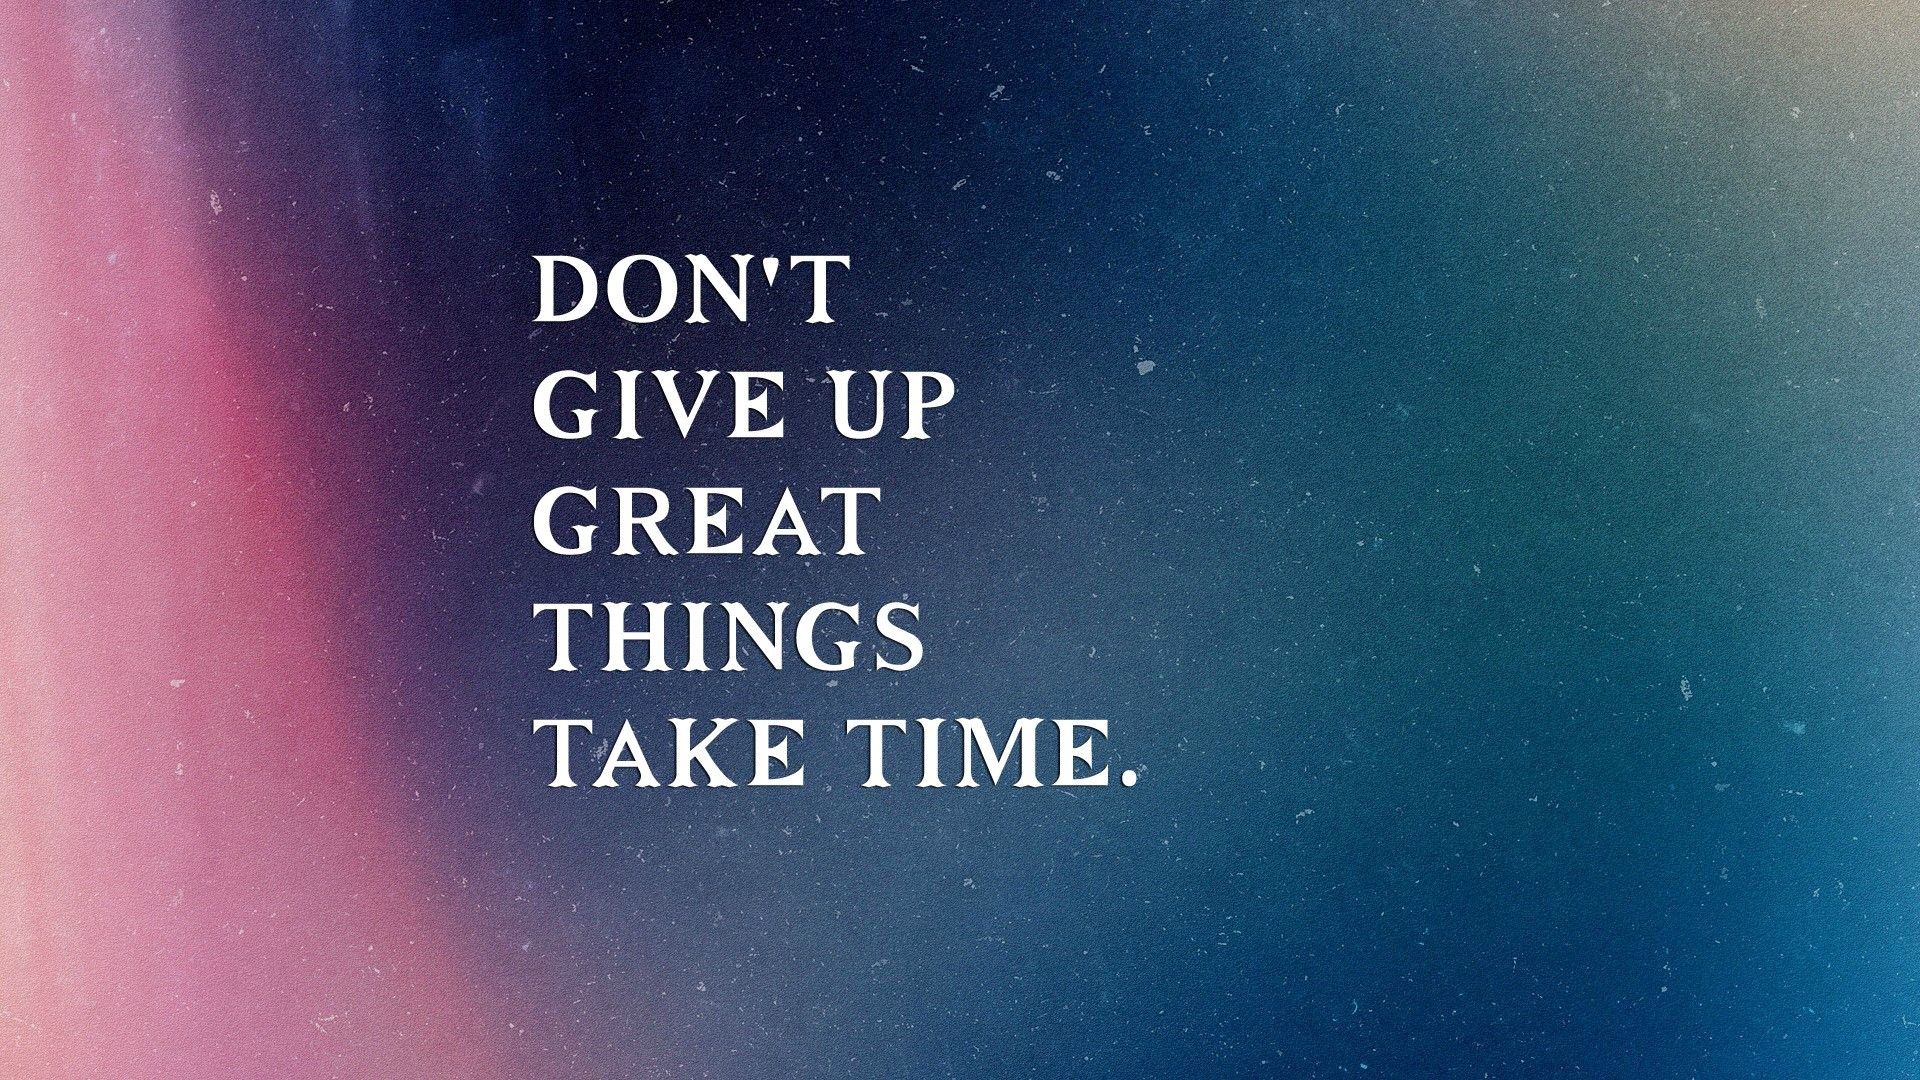 Best Motivational Wallpaper With Inspiring Quotes Give Up Great Things Take Time